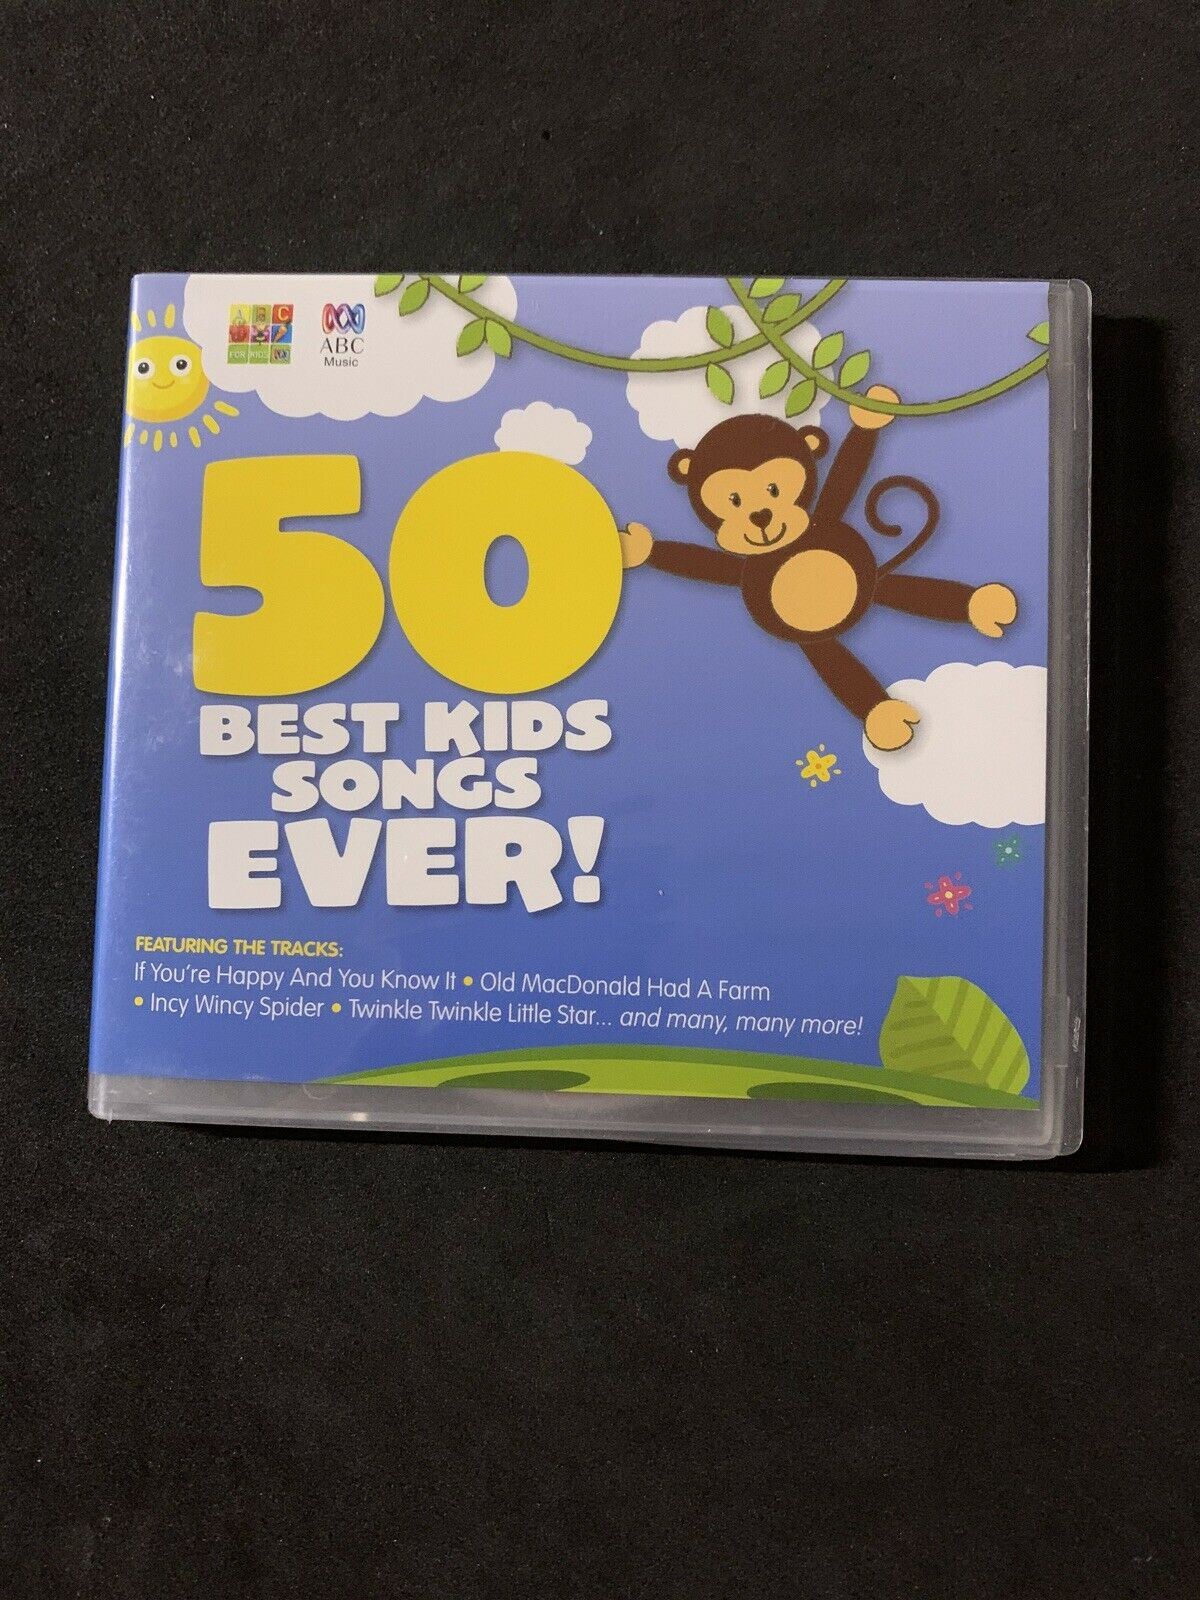 ABC Kids - Ultimate Favourite Kids Songs 3-Discs (CD, 2014)